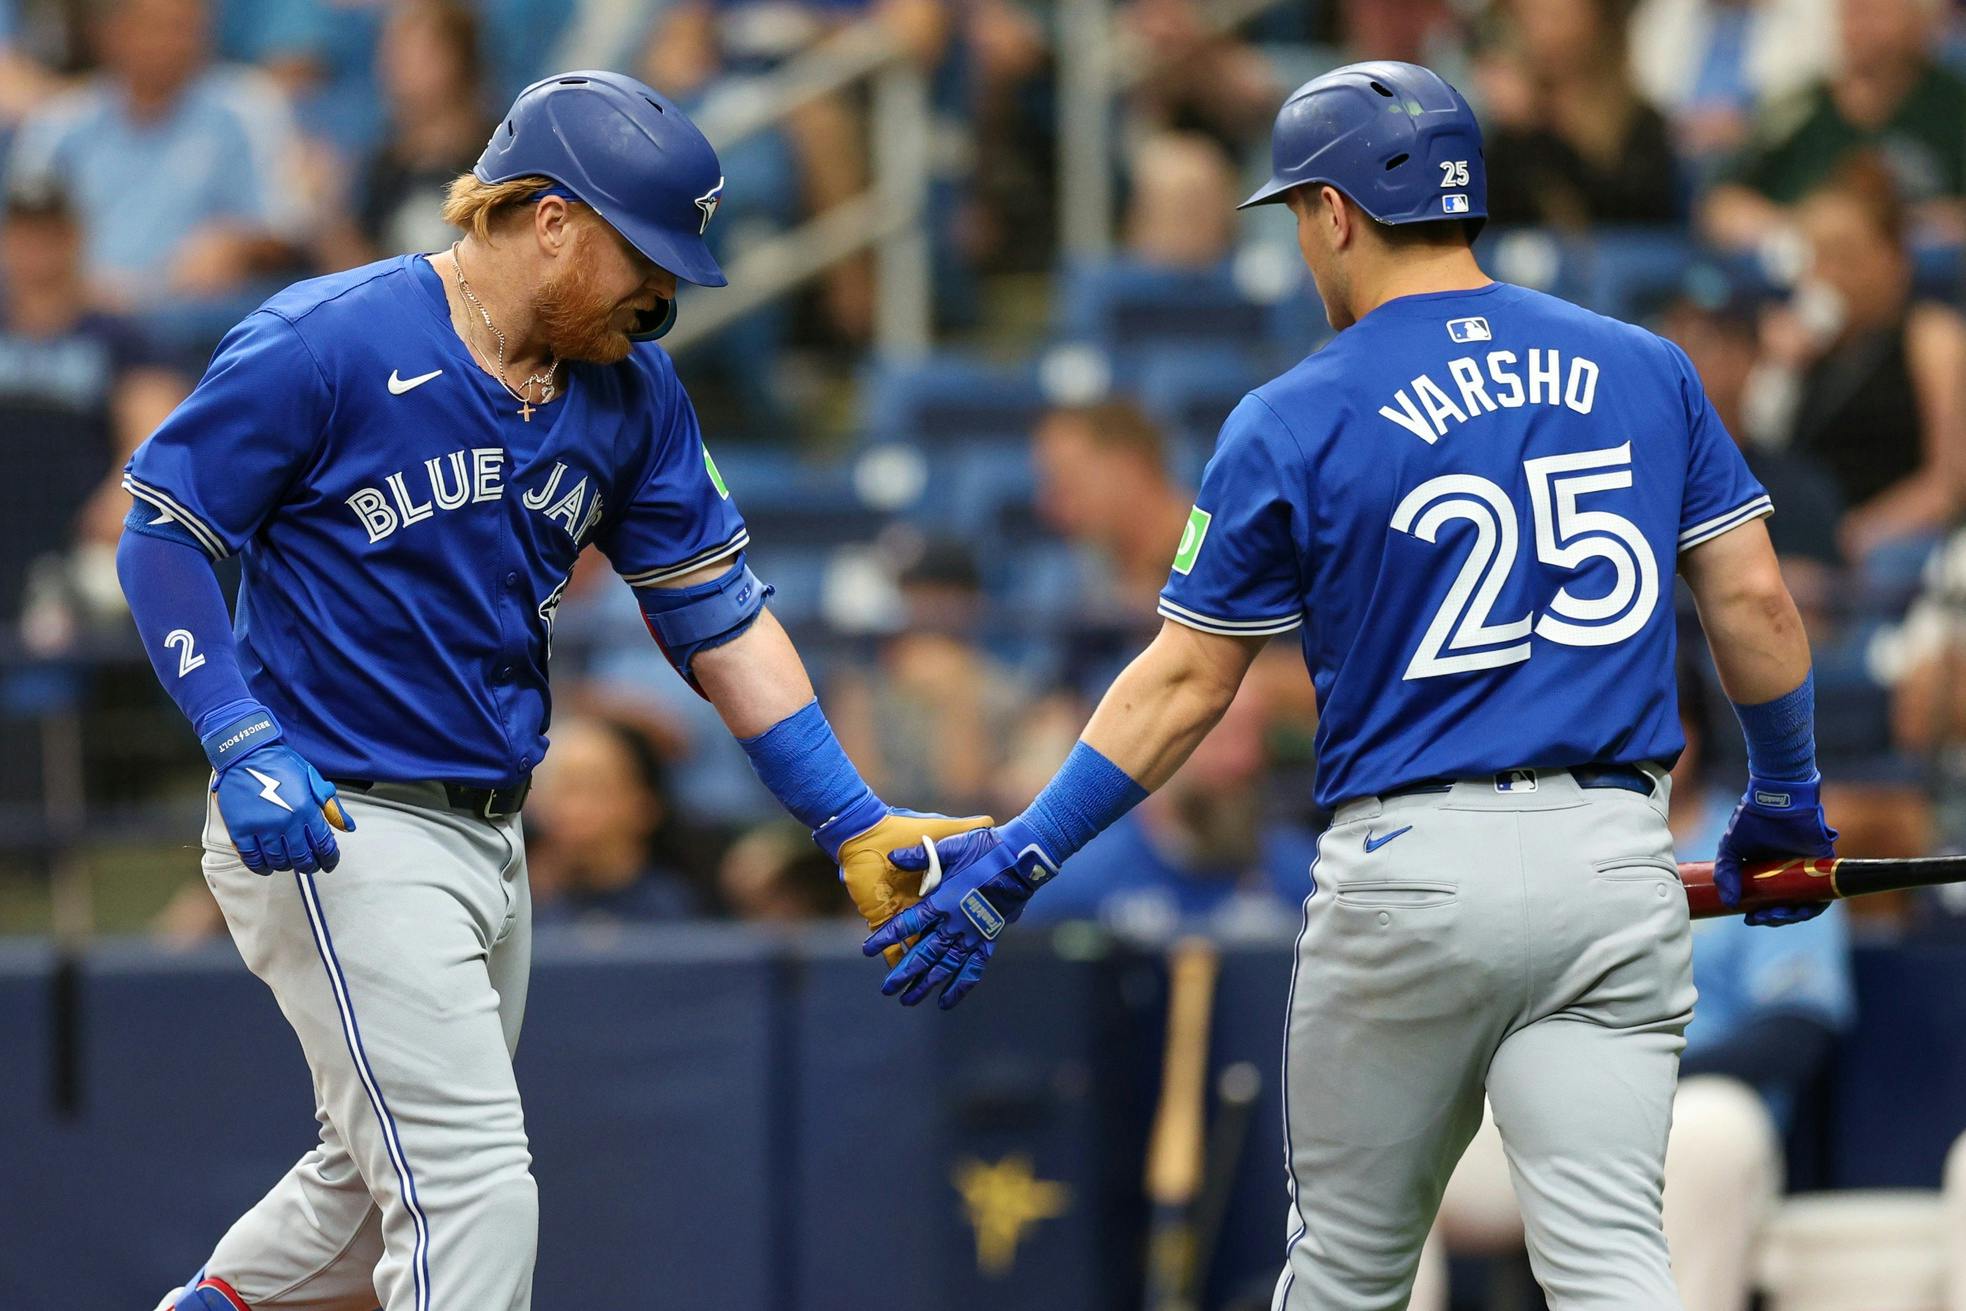 Toronto Blue Jays third baseman Justin Turner (2) is congratulated by center fielder Daulton Varsho (25) after hitting a home runagainst the Tampa Bay Rays in the fifth inning at Tropicana Field.